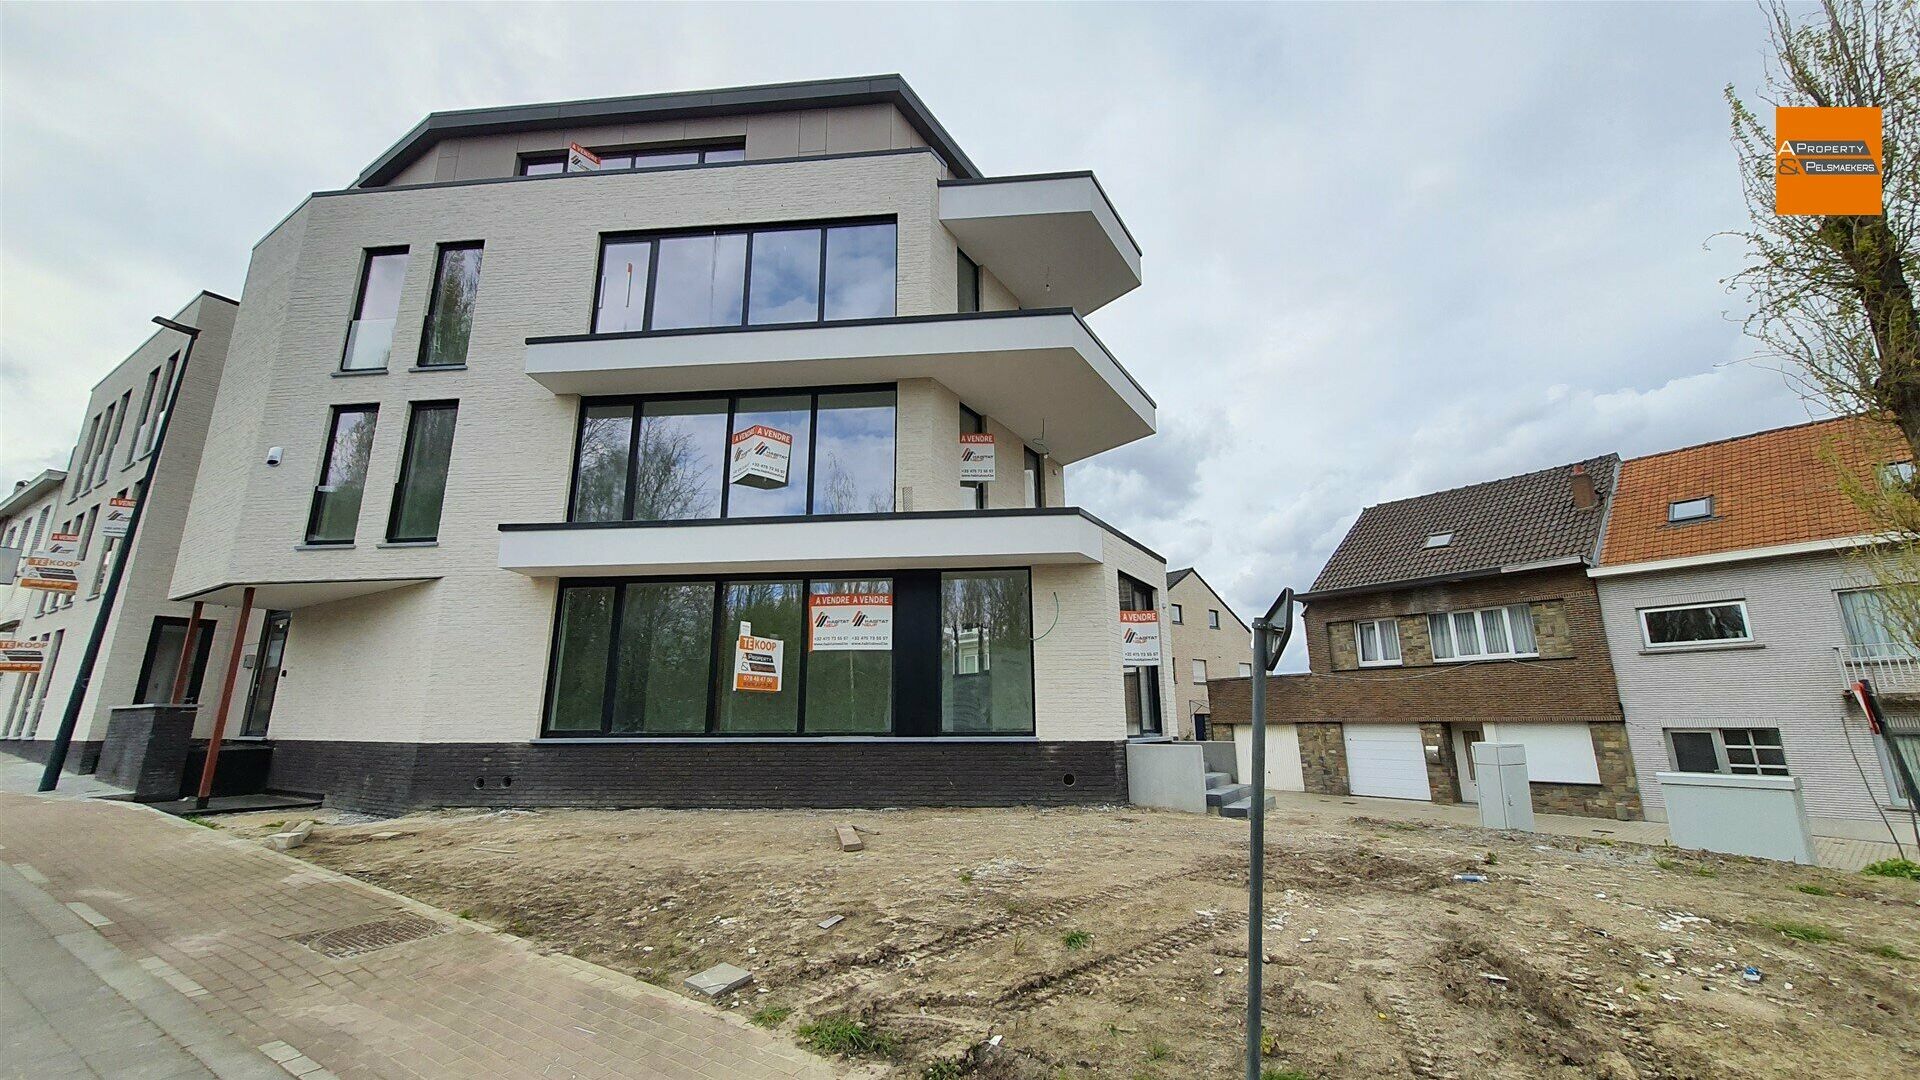 Apartment building for sale in SINT-STEVENS-WOLUWE